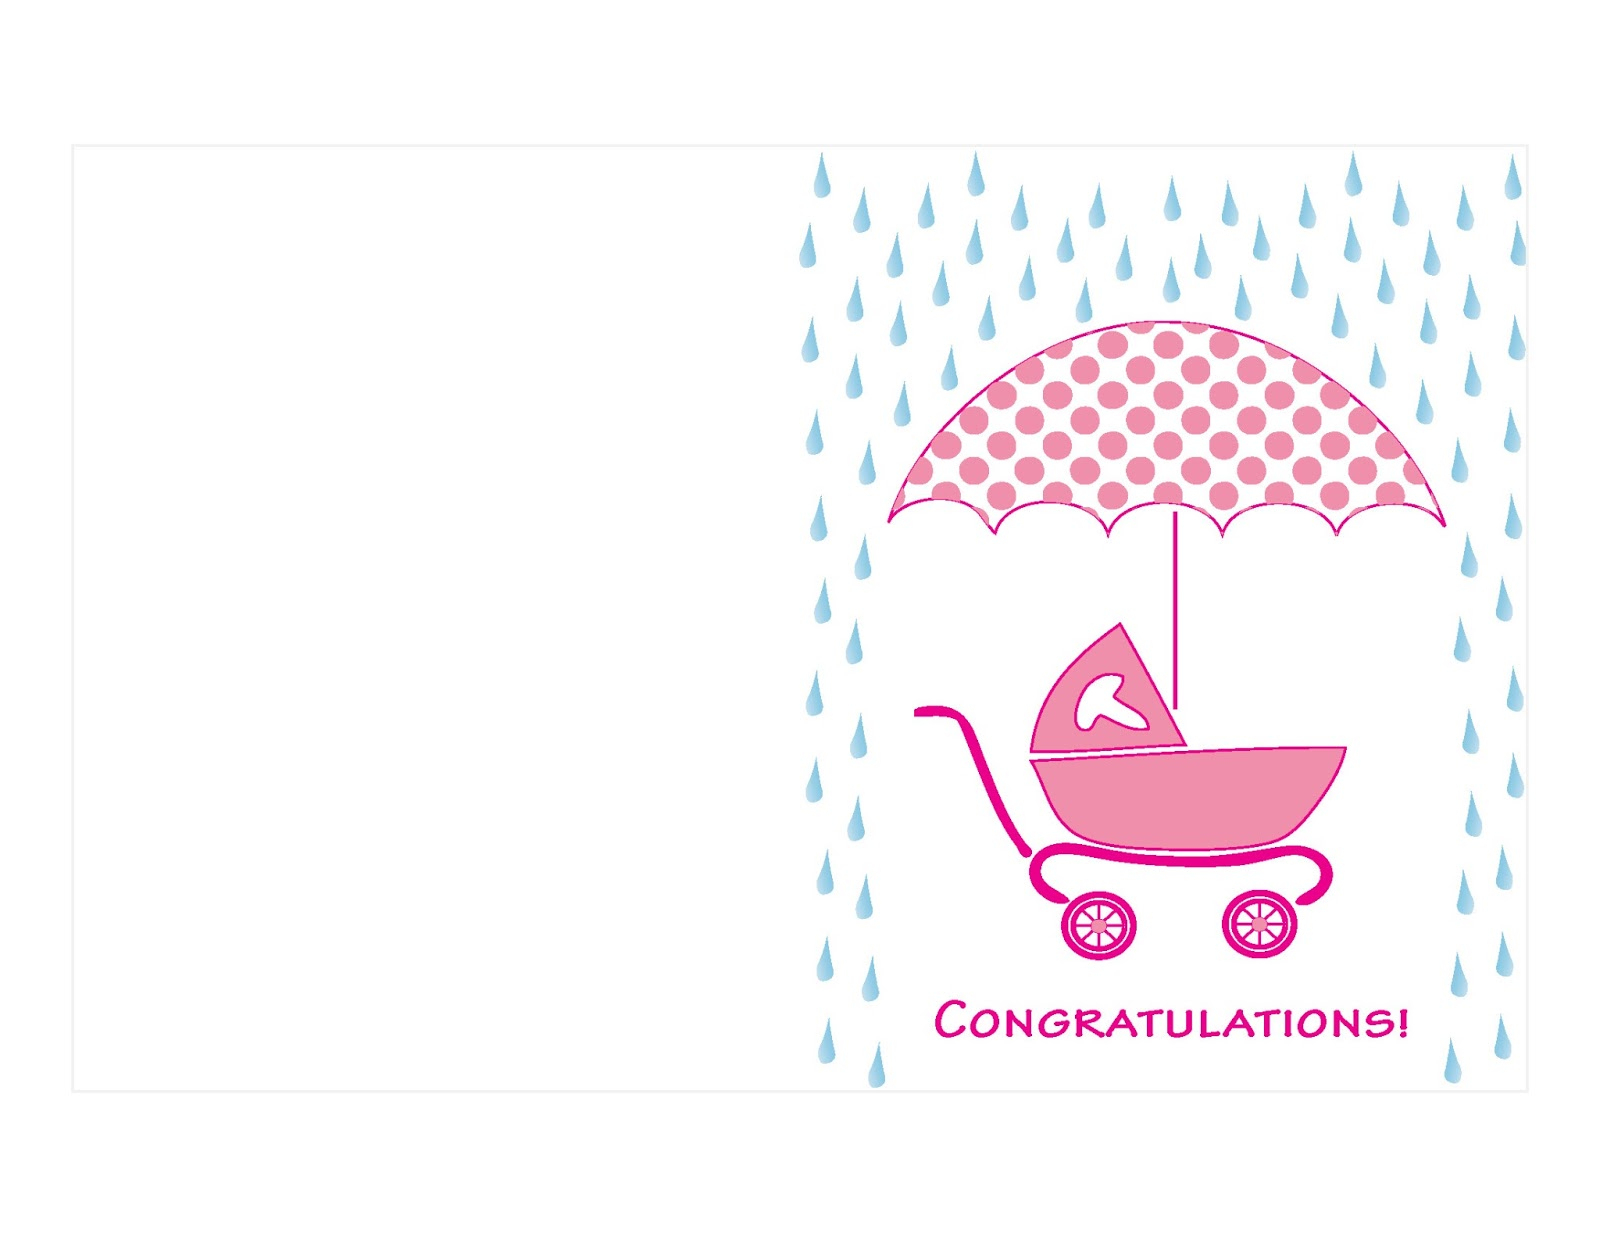 Free Printable Baby Cards My Free Printable Towel Rack For Glass - Congratulations On Your Baby Girl Free Printable Cards